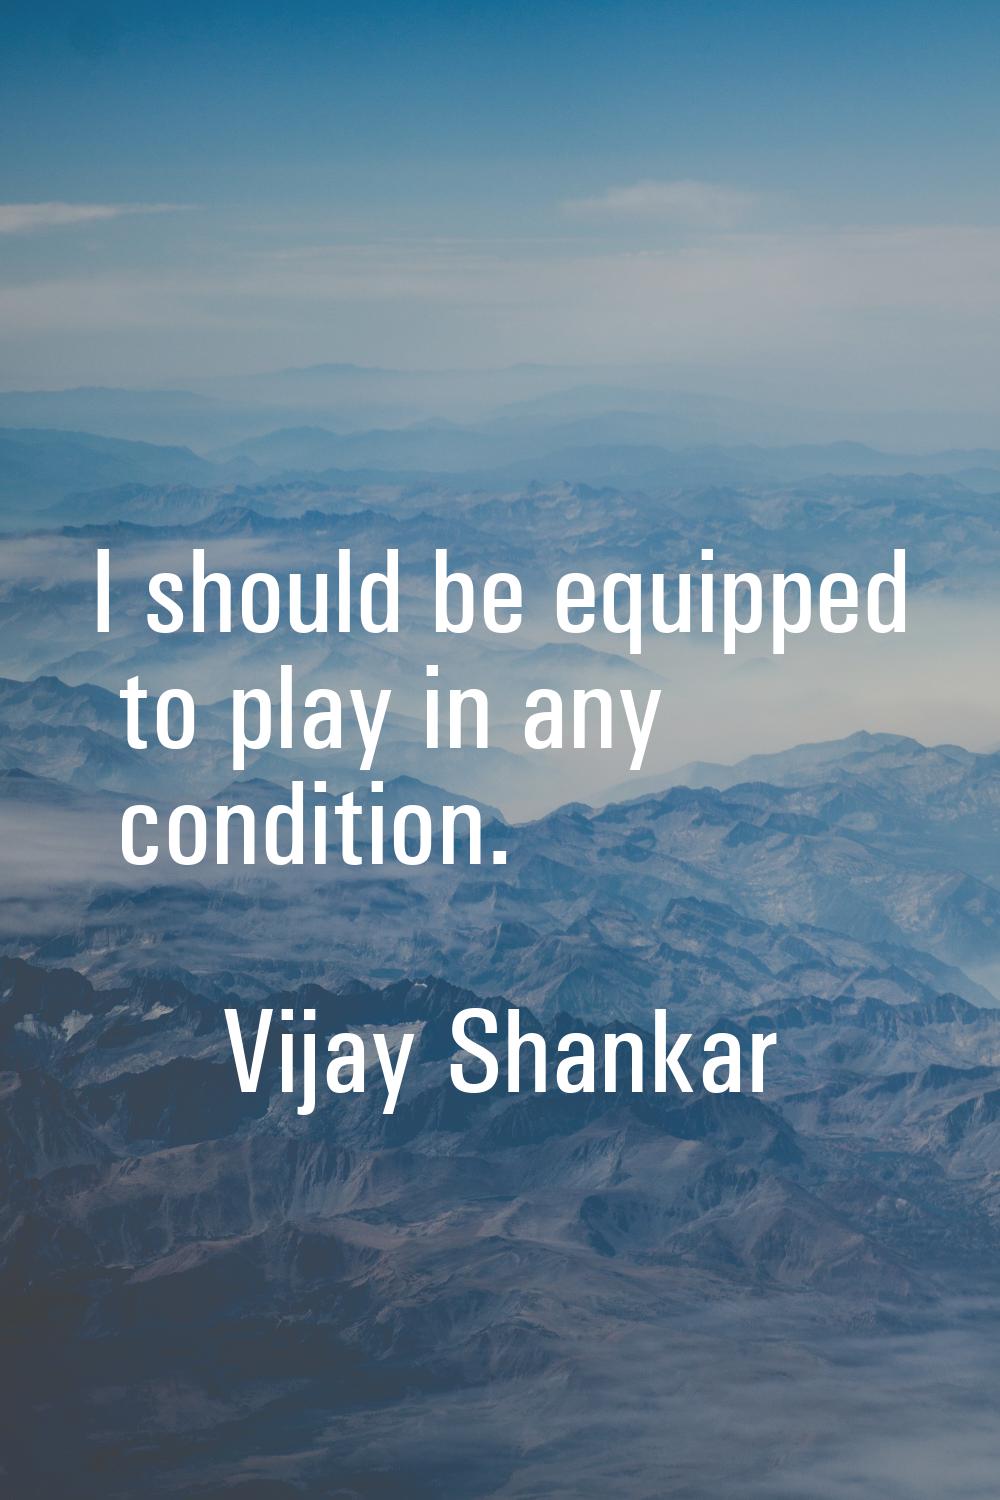 I should be equipped to play in any condition.